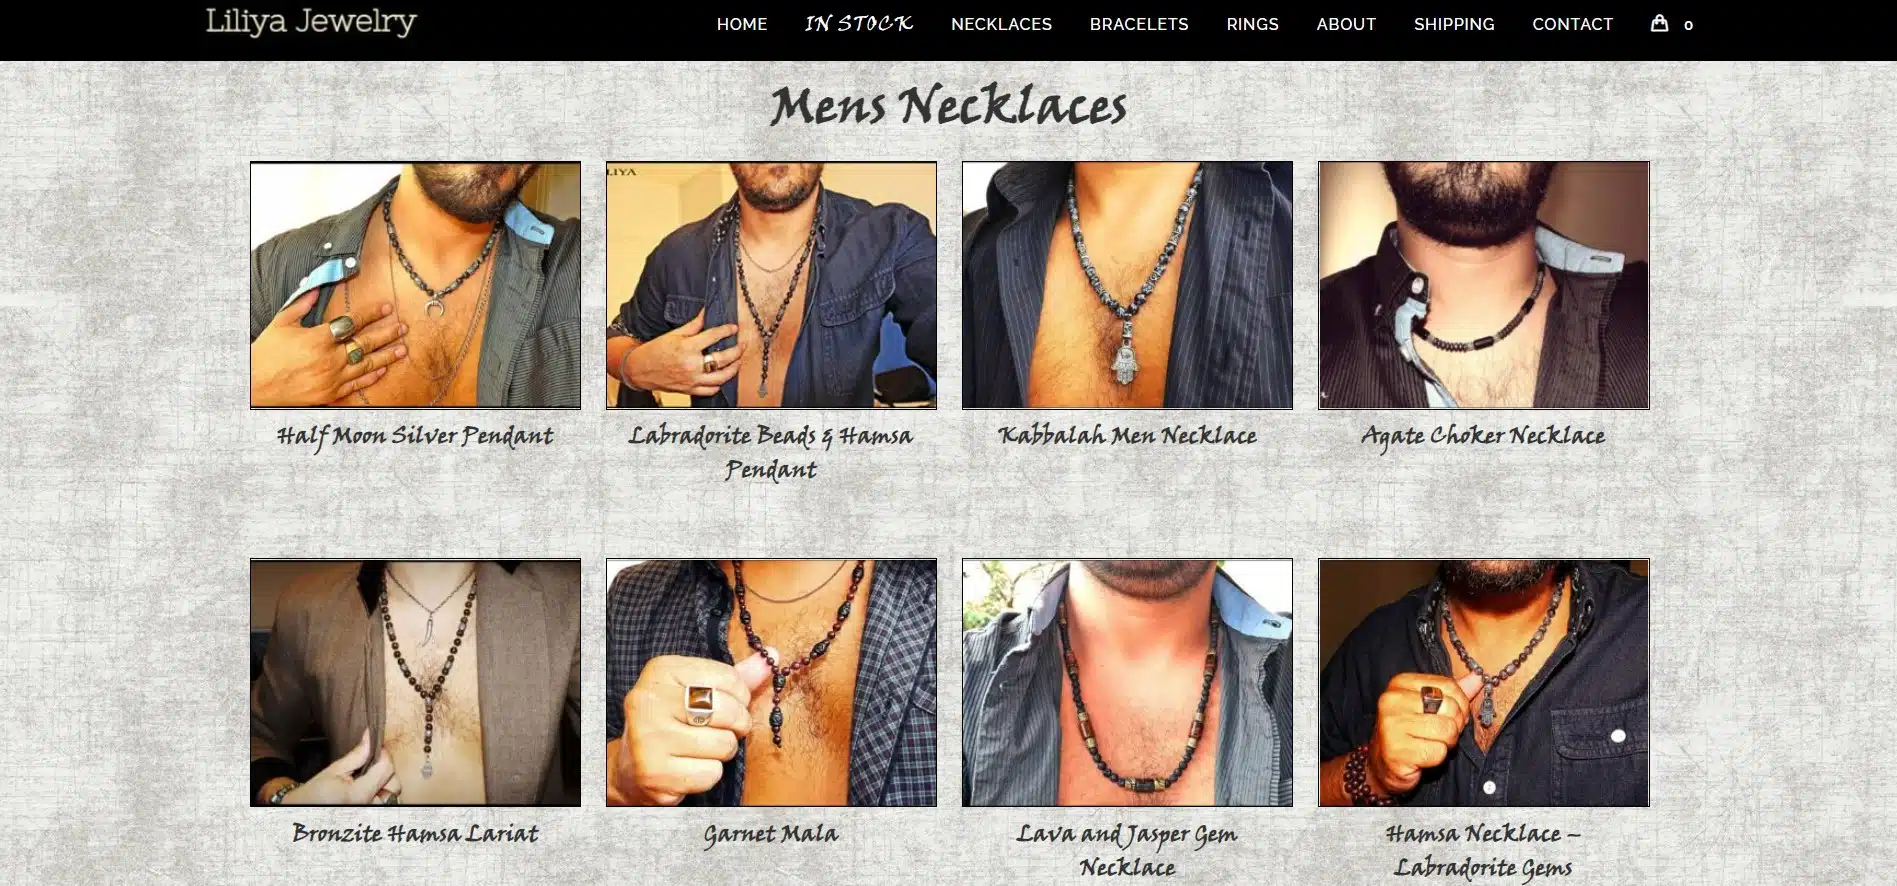 The 12 Best Places to Buy Men's Jewelry Online - The Modest Man